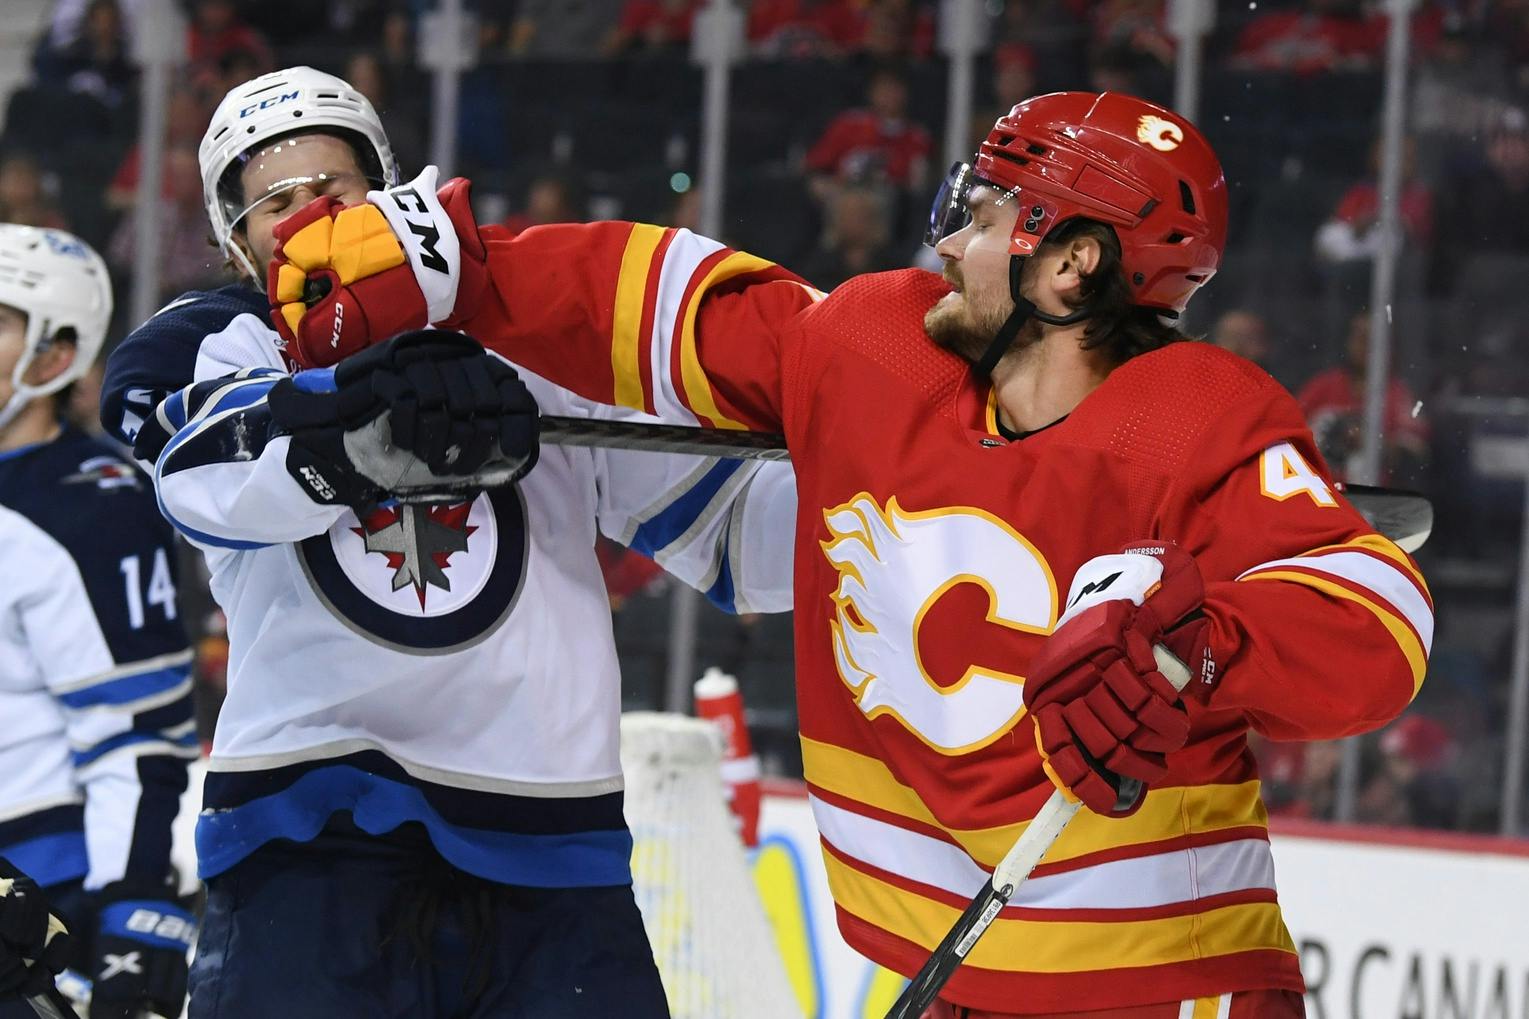 Calgary Flames defenceman Rasmus Andersson recovering after crash